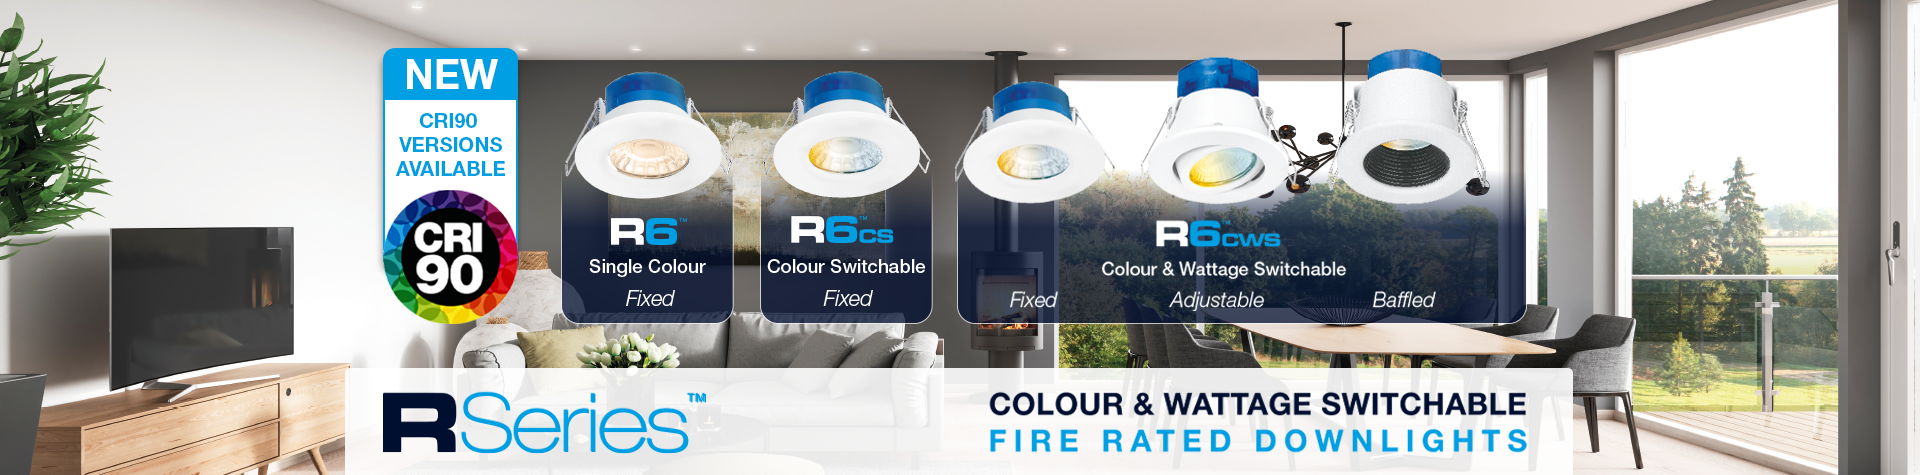 Show products in category What are the benefits of a CRI90 downlight?